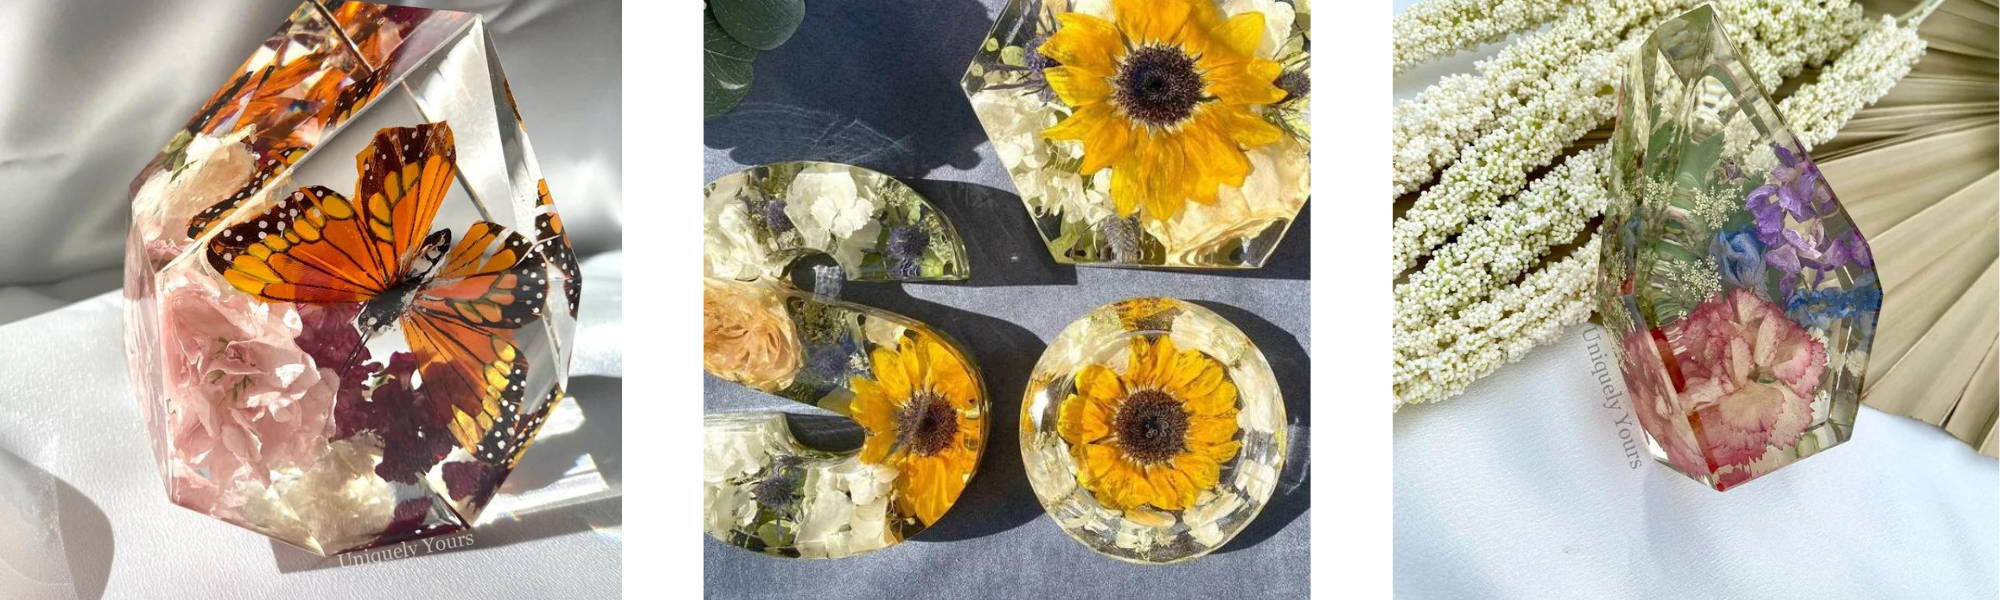 uniquely yours resin artwork flowers encapsulated in clear resin